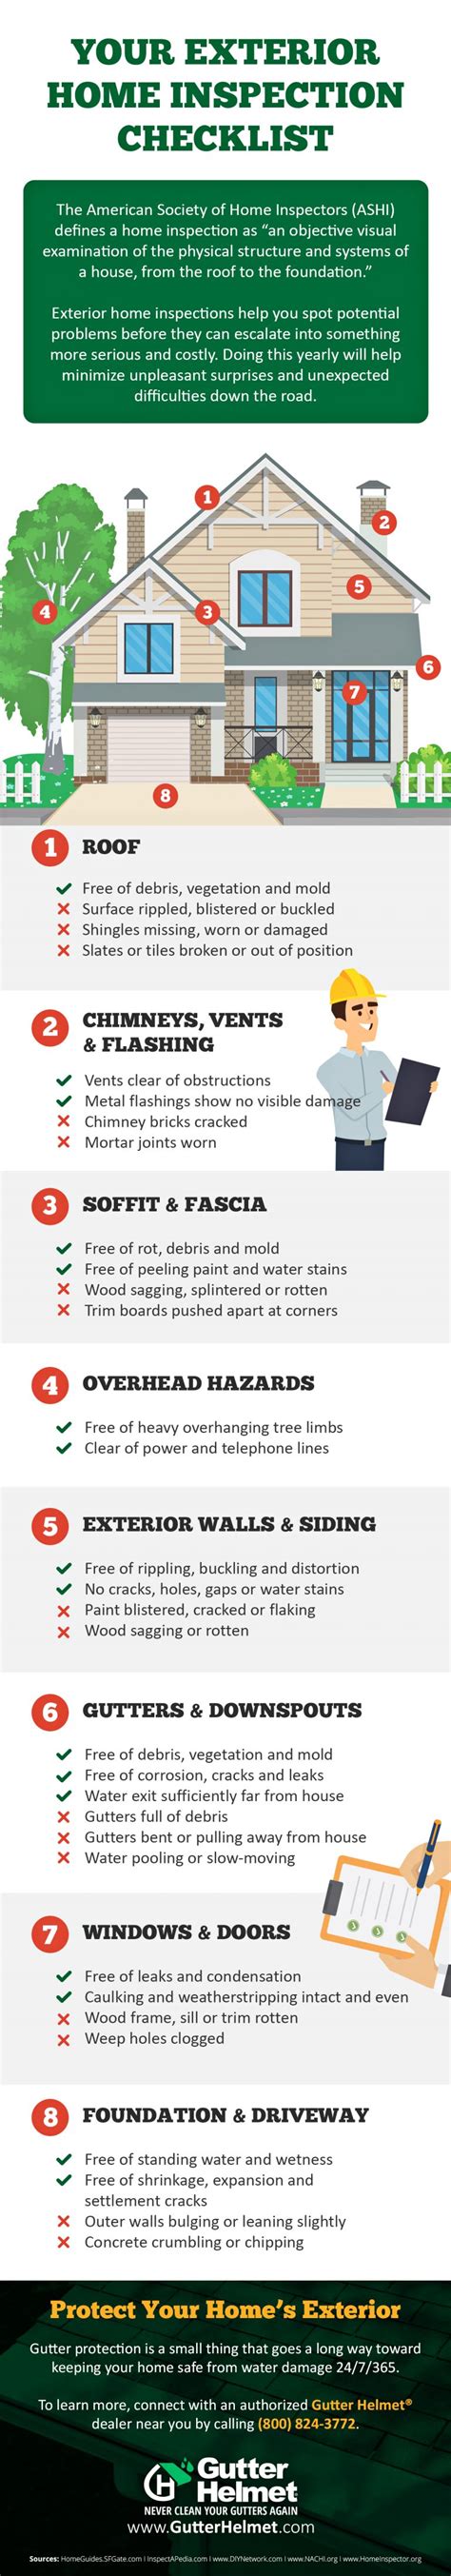 Infographic Your Exterior Home Inspection Checklist